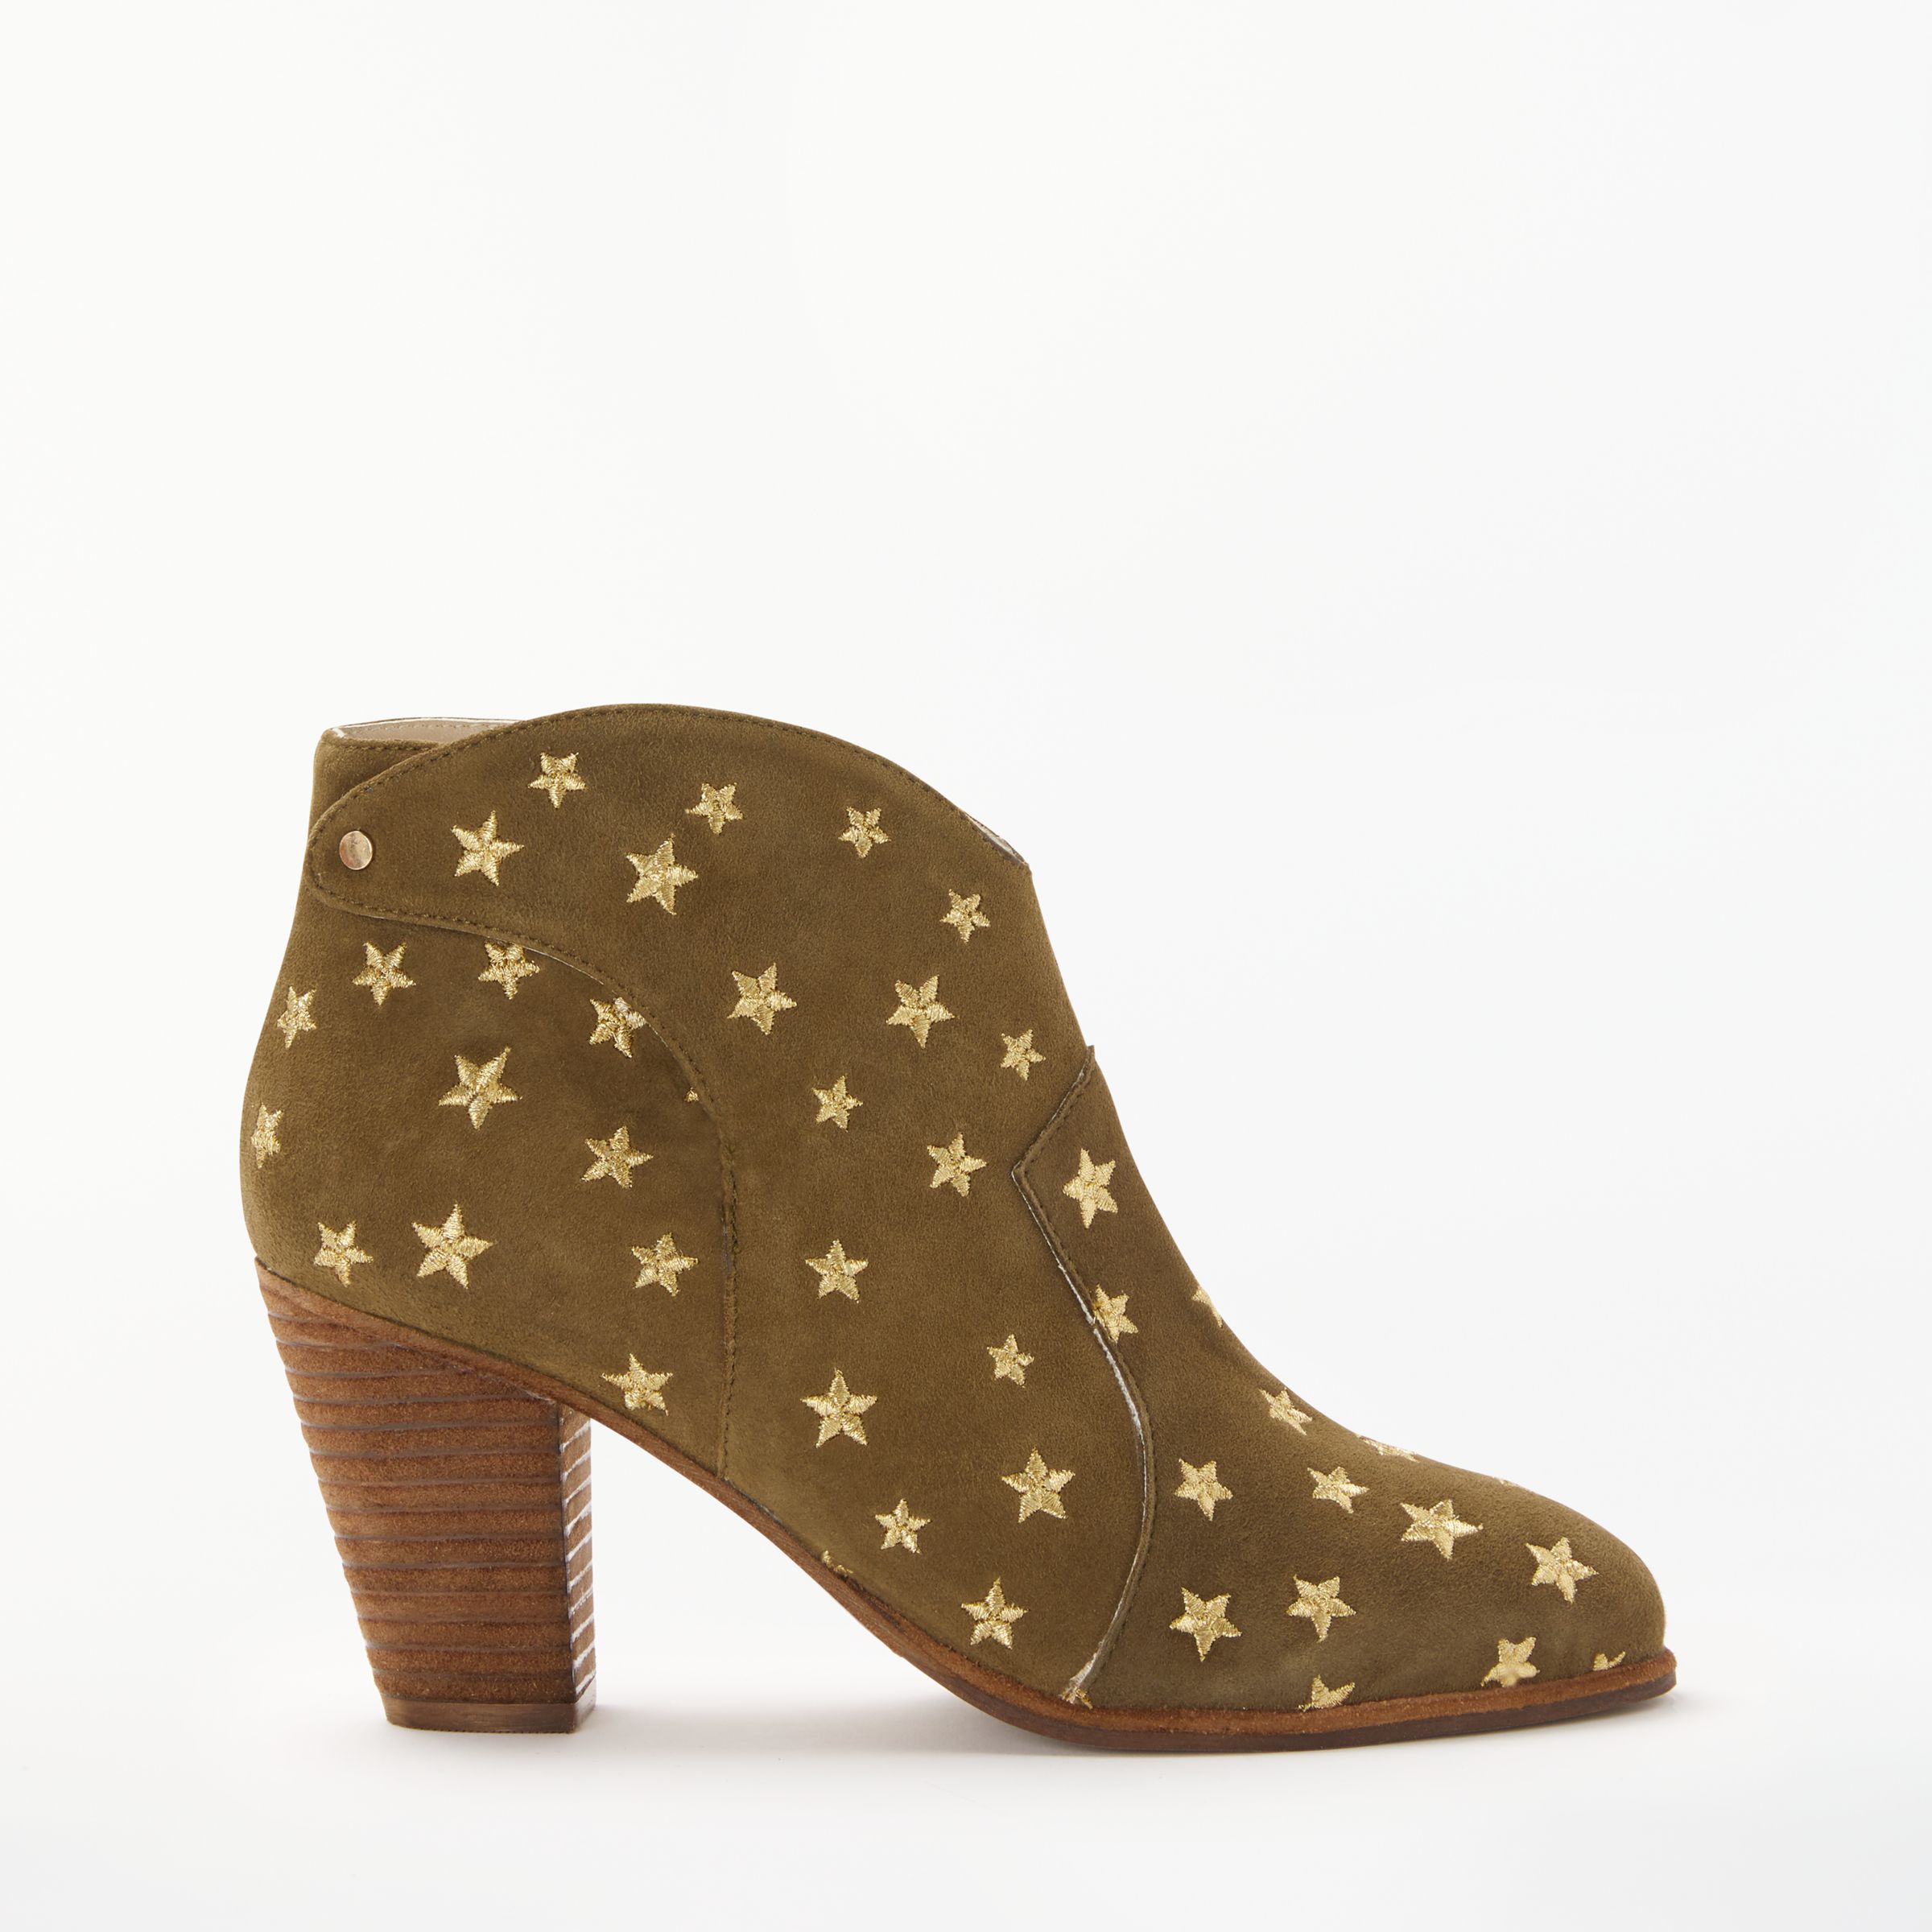 Boden Hoxton Heeled Ankle Boots, Military Green Suede at John Lewis ...